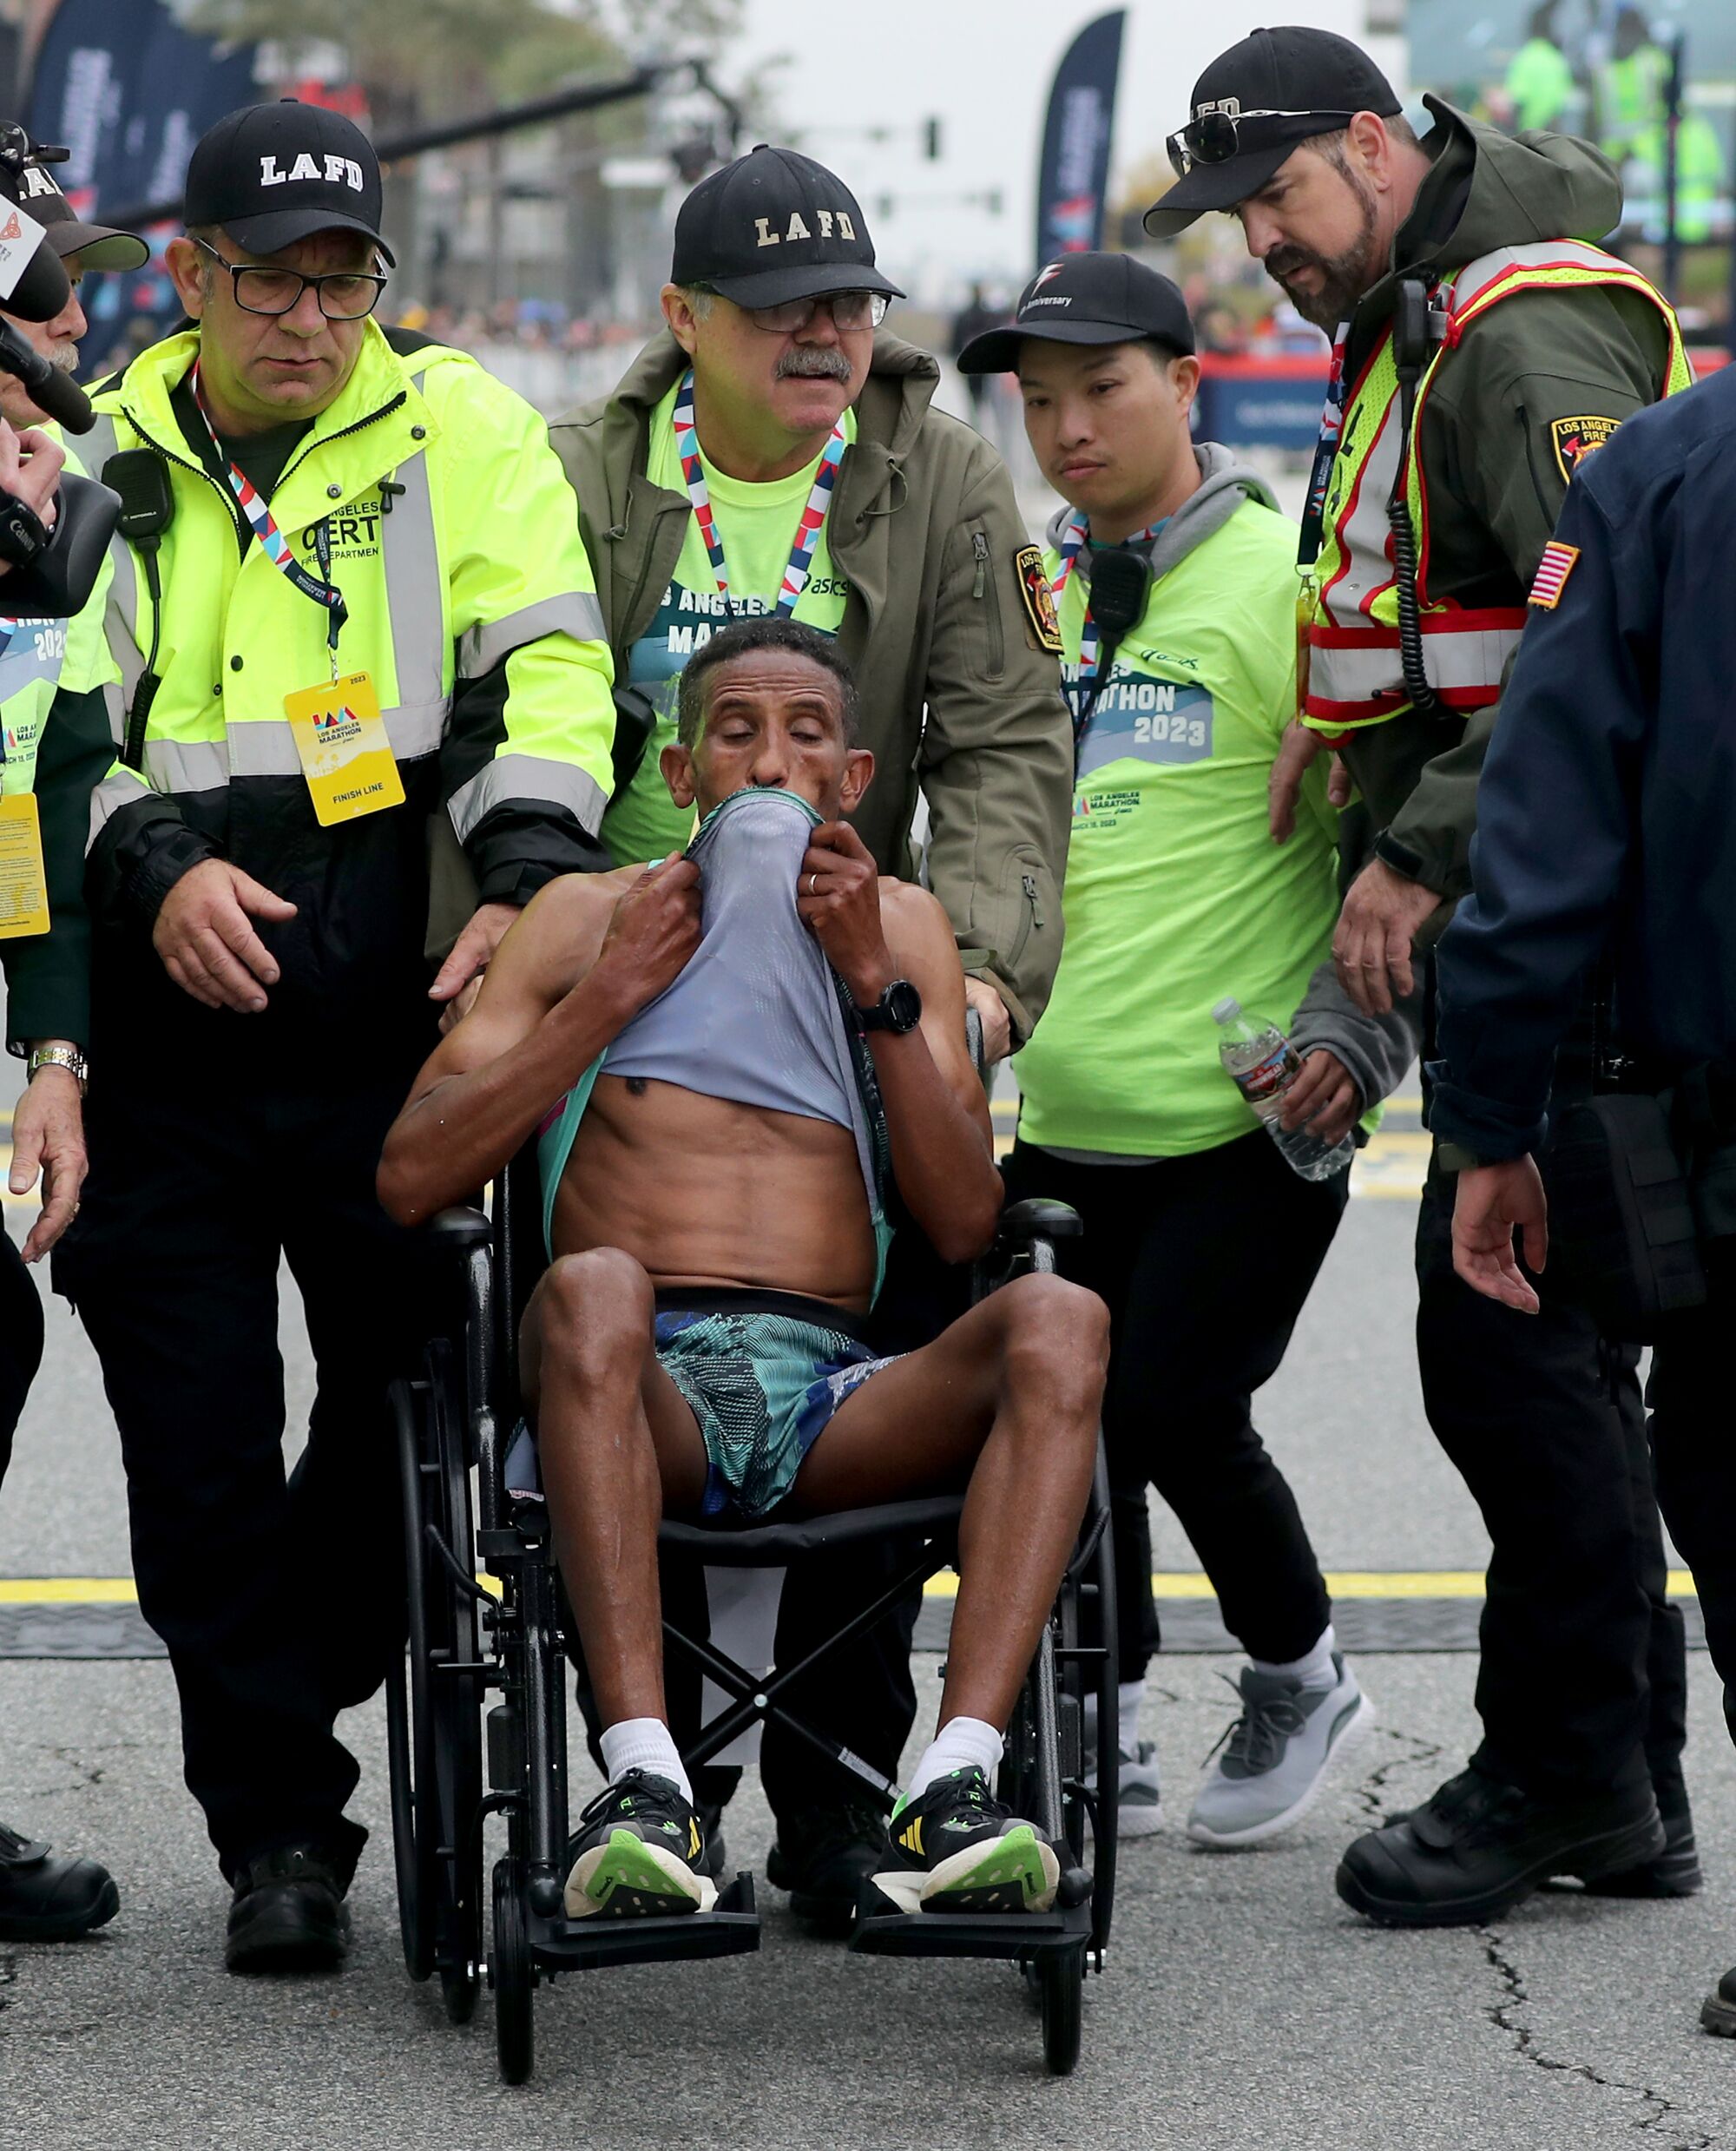 Yemane Tsegay of Ethiopia is taken away in a wheelchair after collapsing at the finish line.